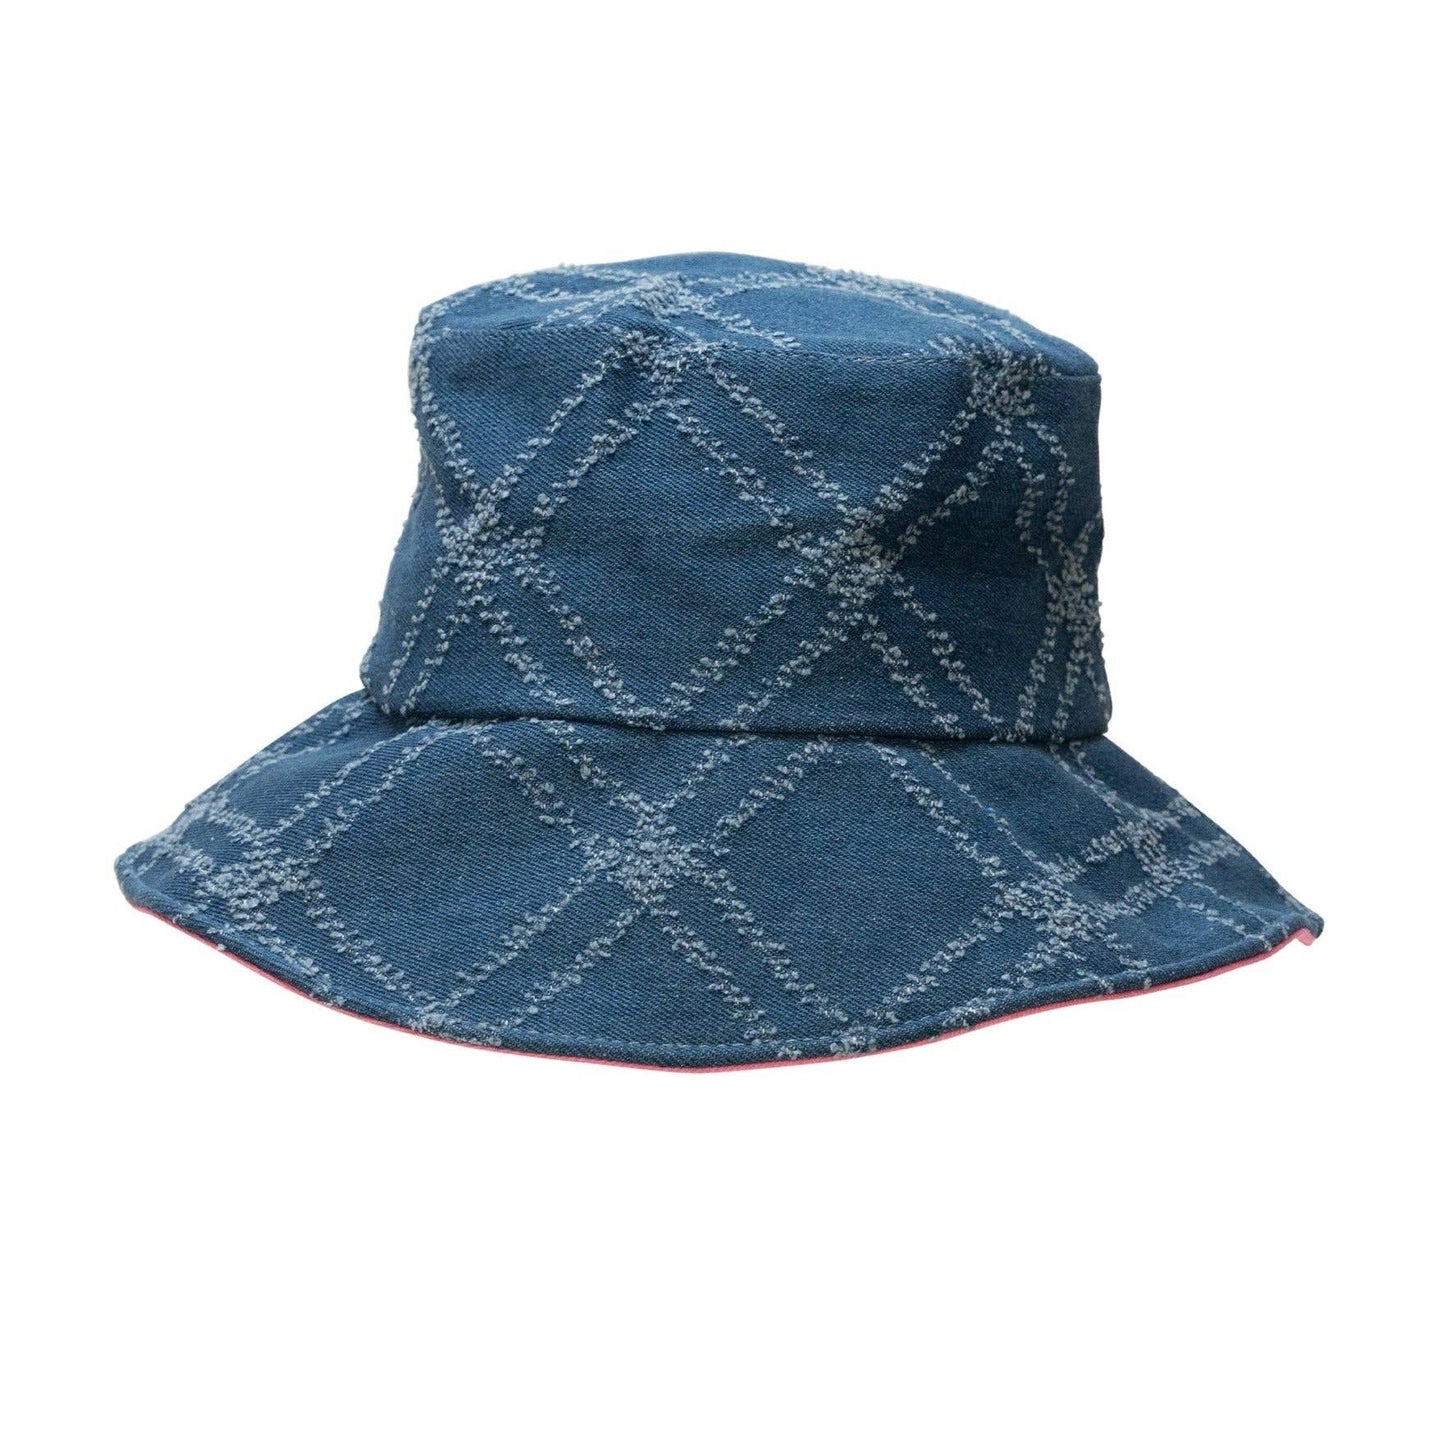 Quilted Denim Bucket Hat in Blue and Pink